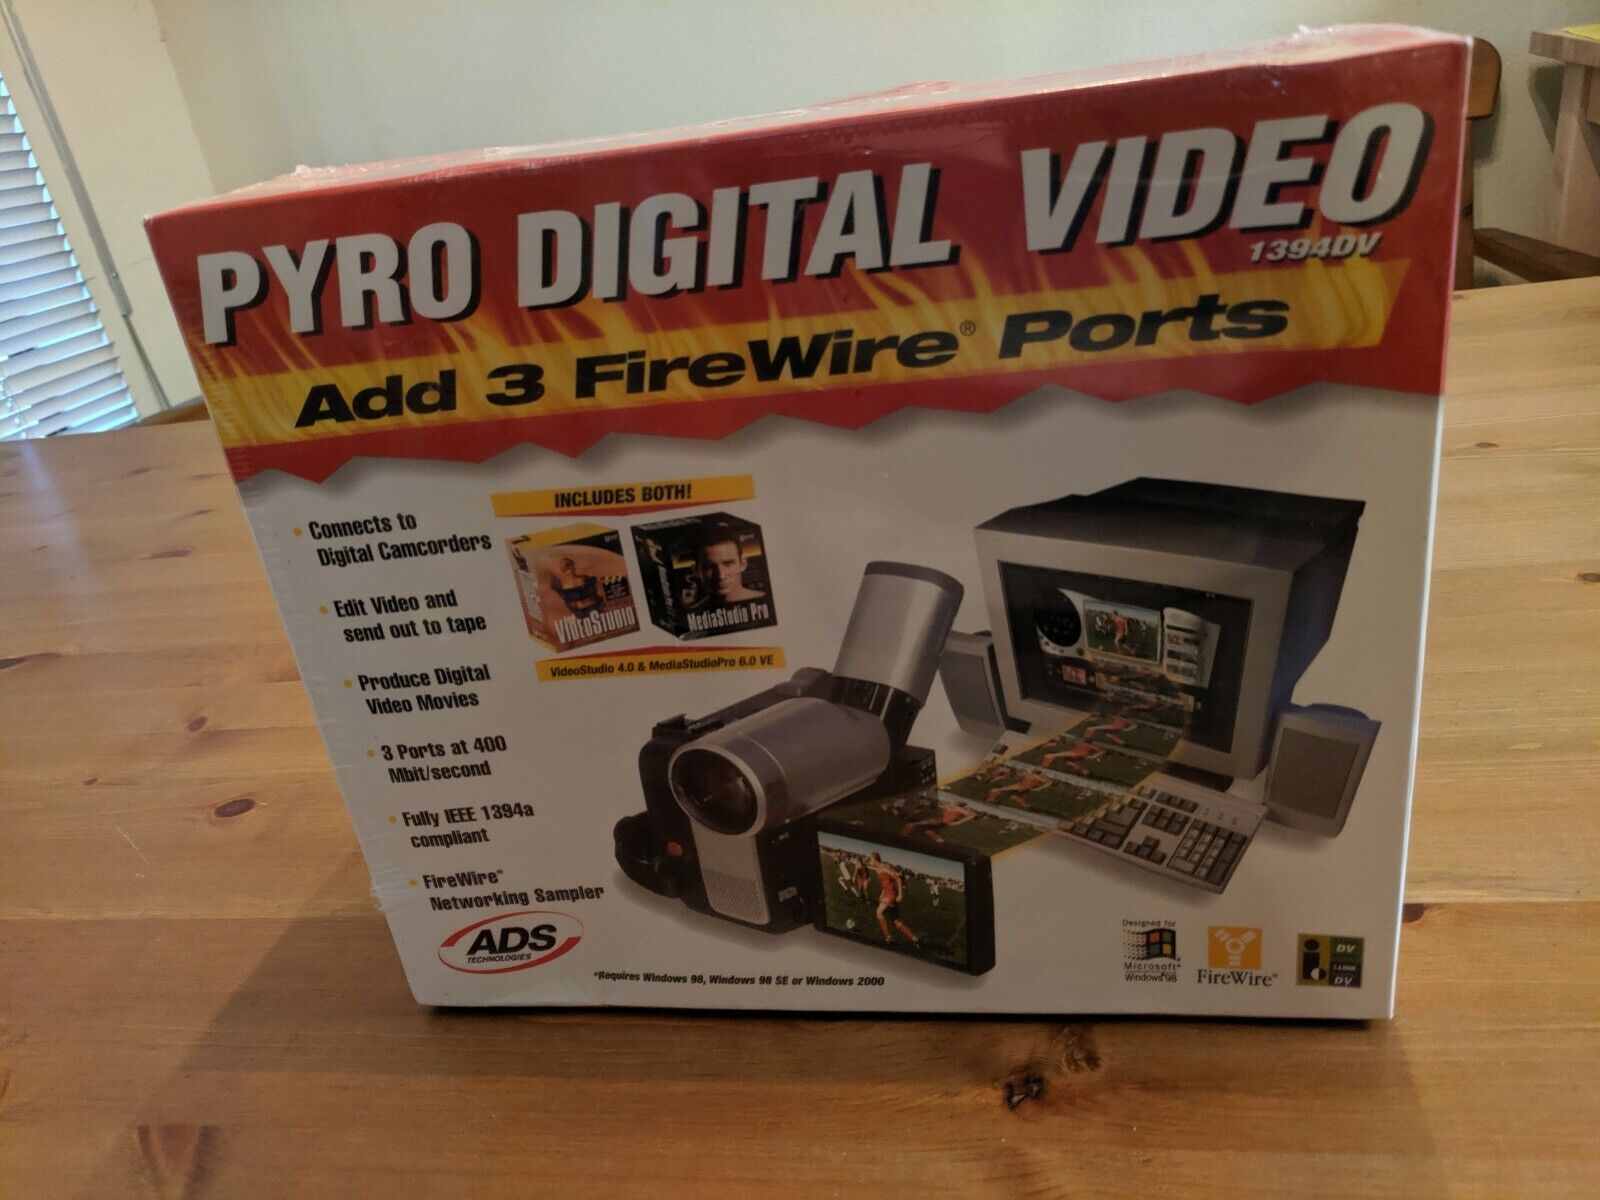 Pyro Digital Video 1394DV: Create Exciting Videos in Just Minutes - Sealed New